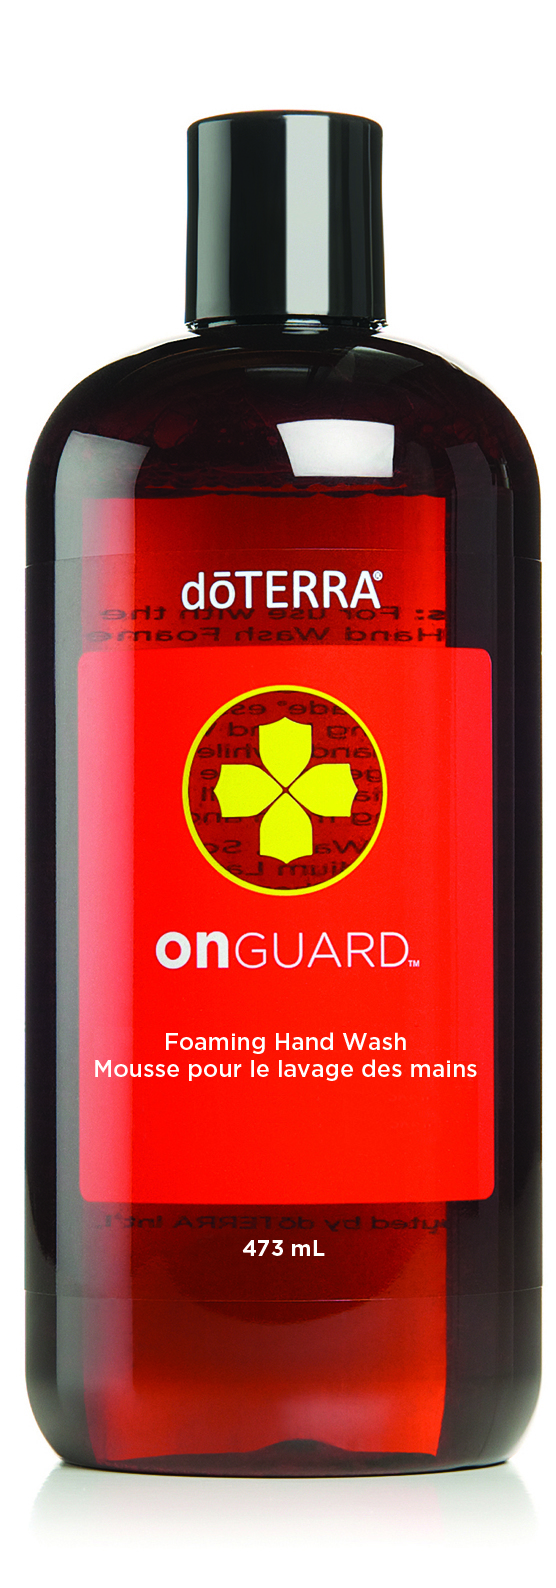 How to Make doTERRA On Guard Foaming Hand Wash